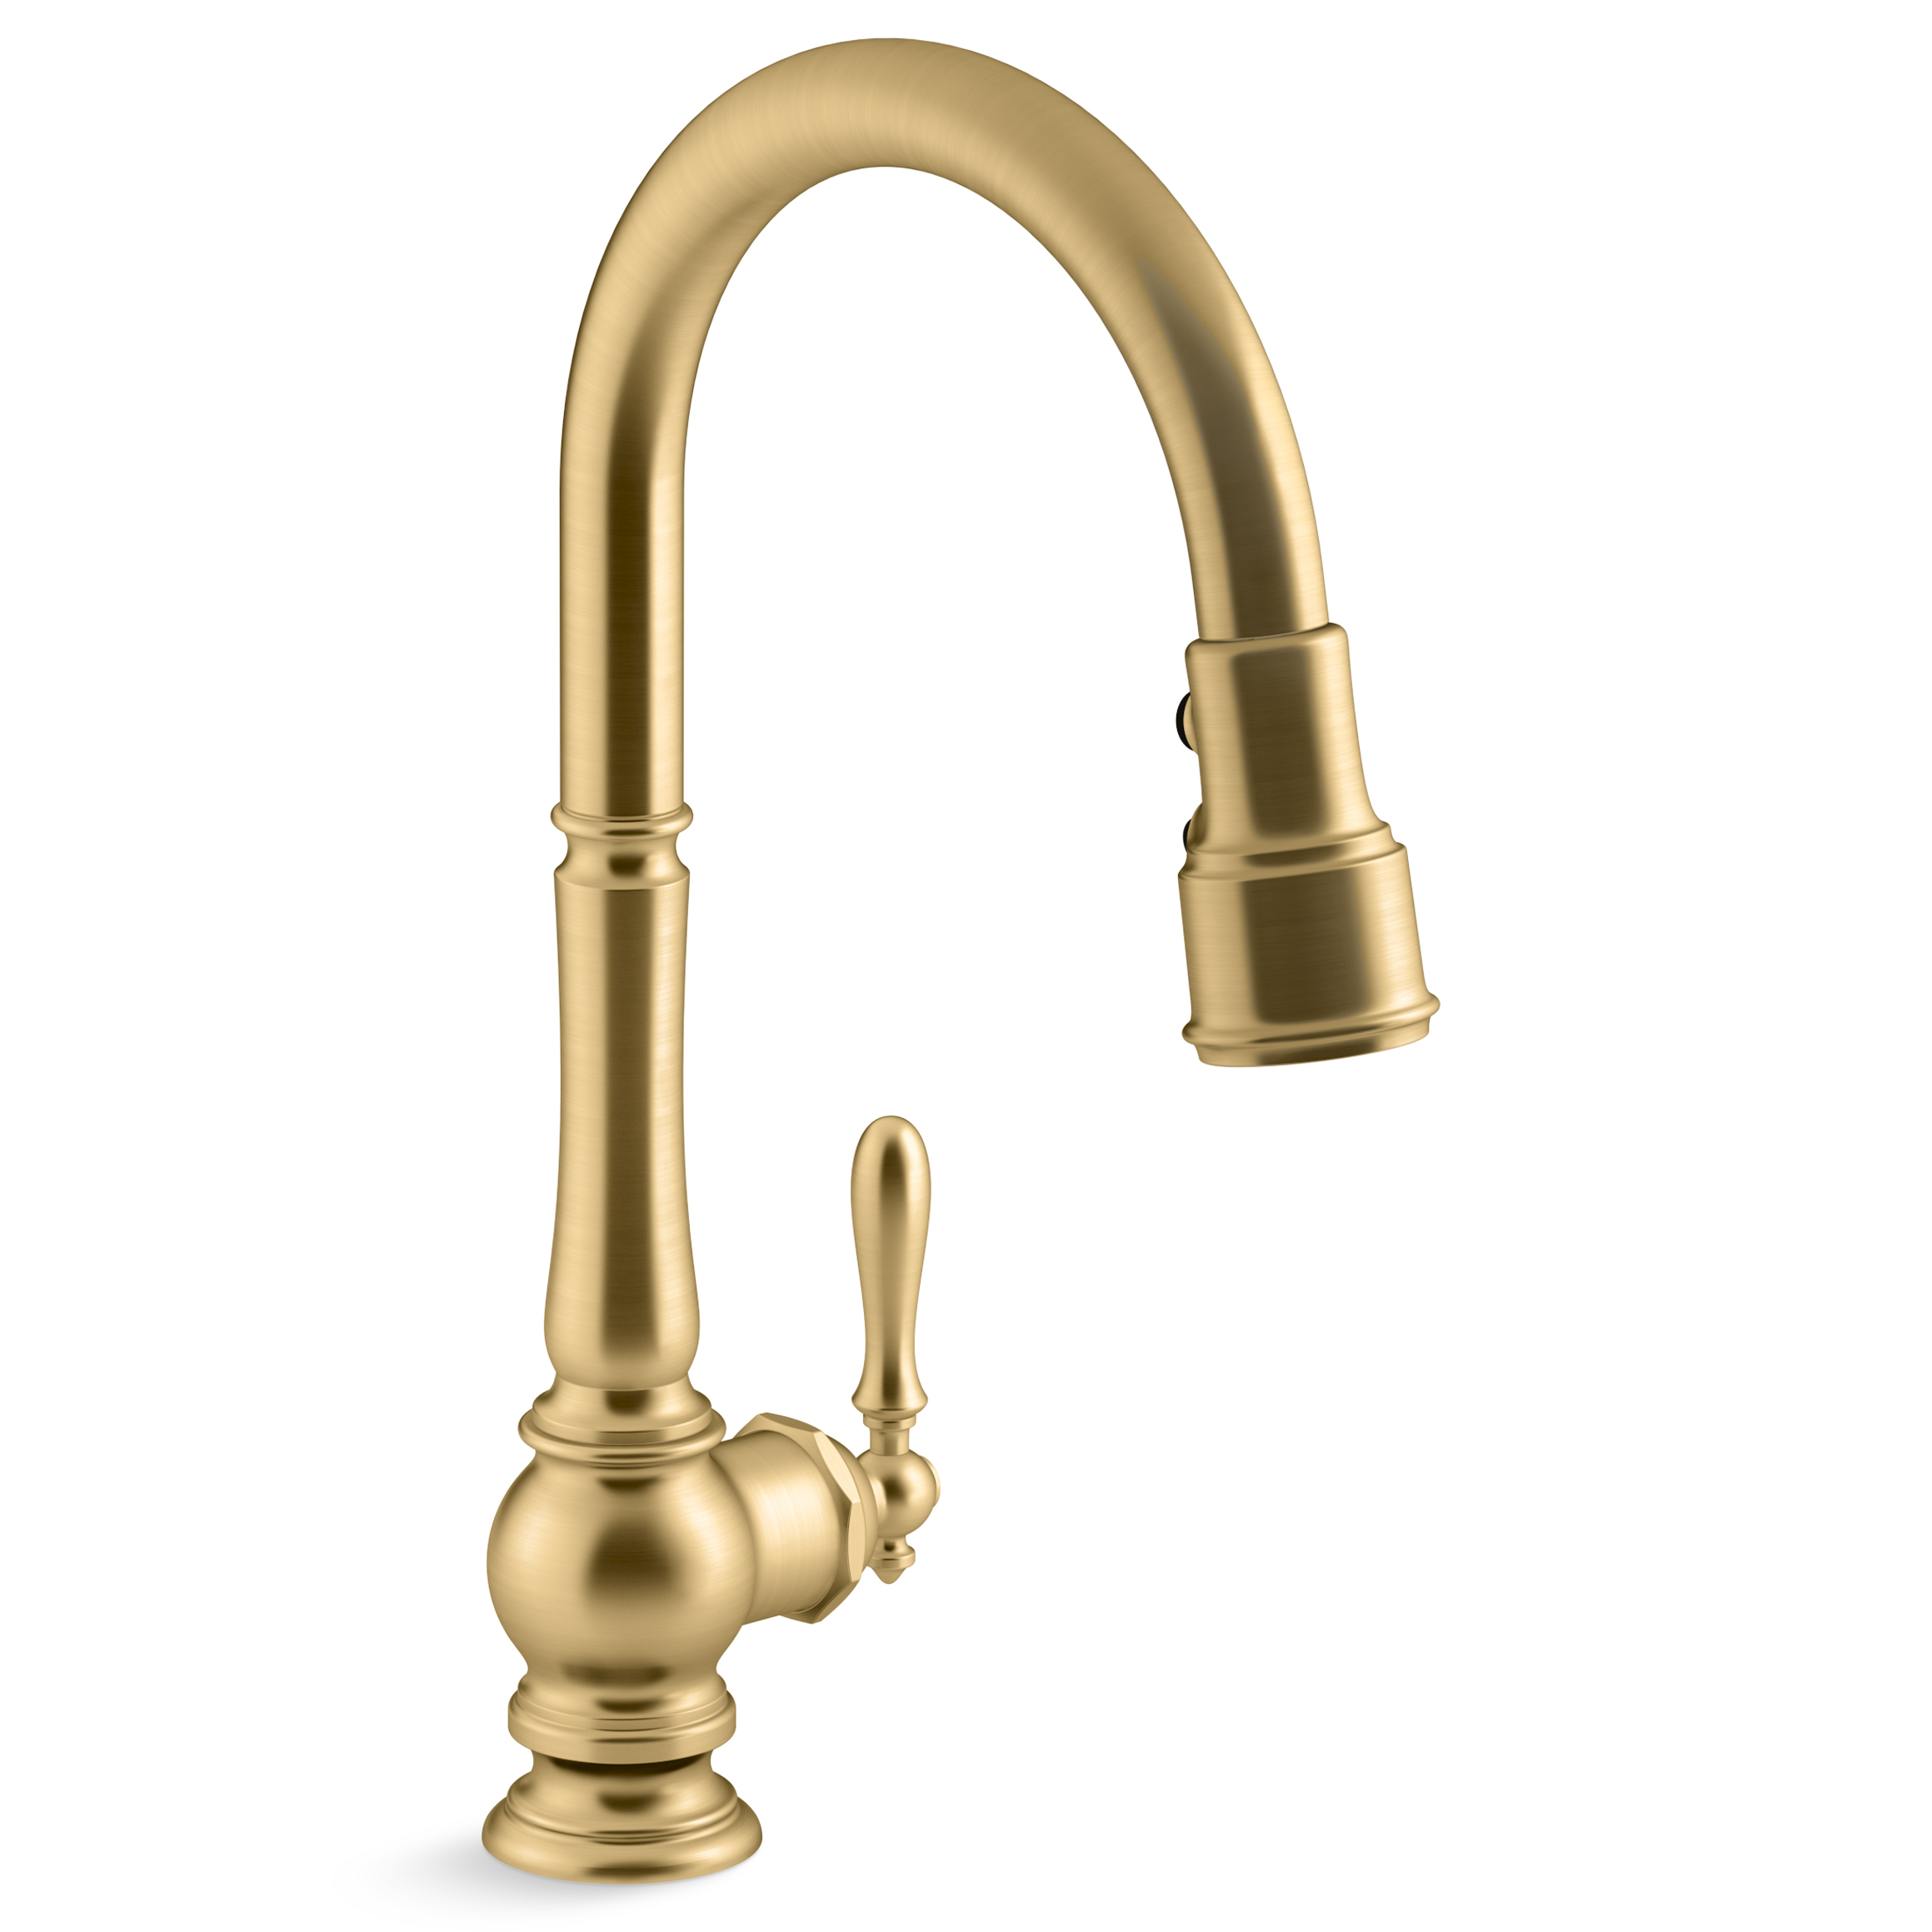 Kohler® 99259-2MB Artifacts® Single-Hole Pull-Down Kitchen Faucet, Brushed Brass